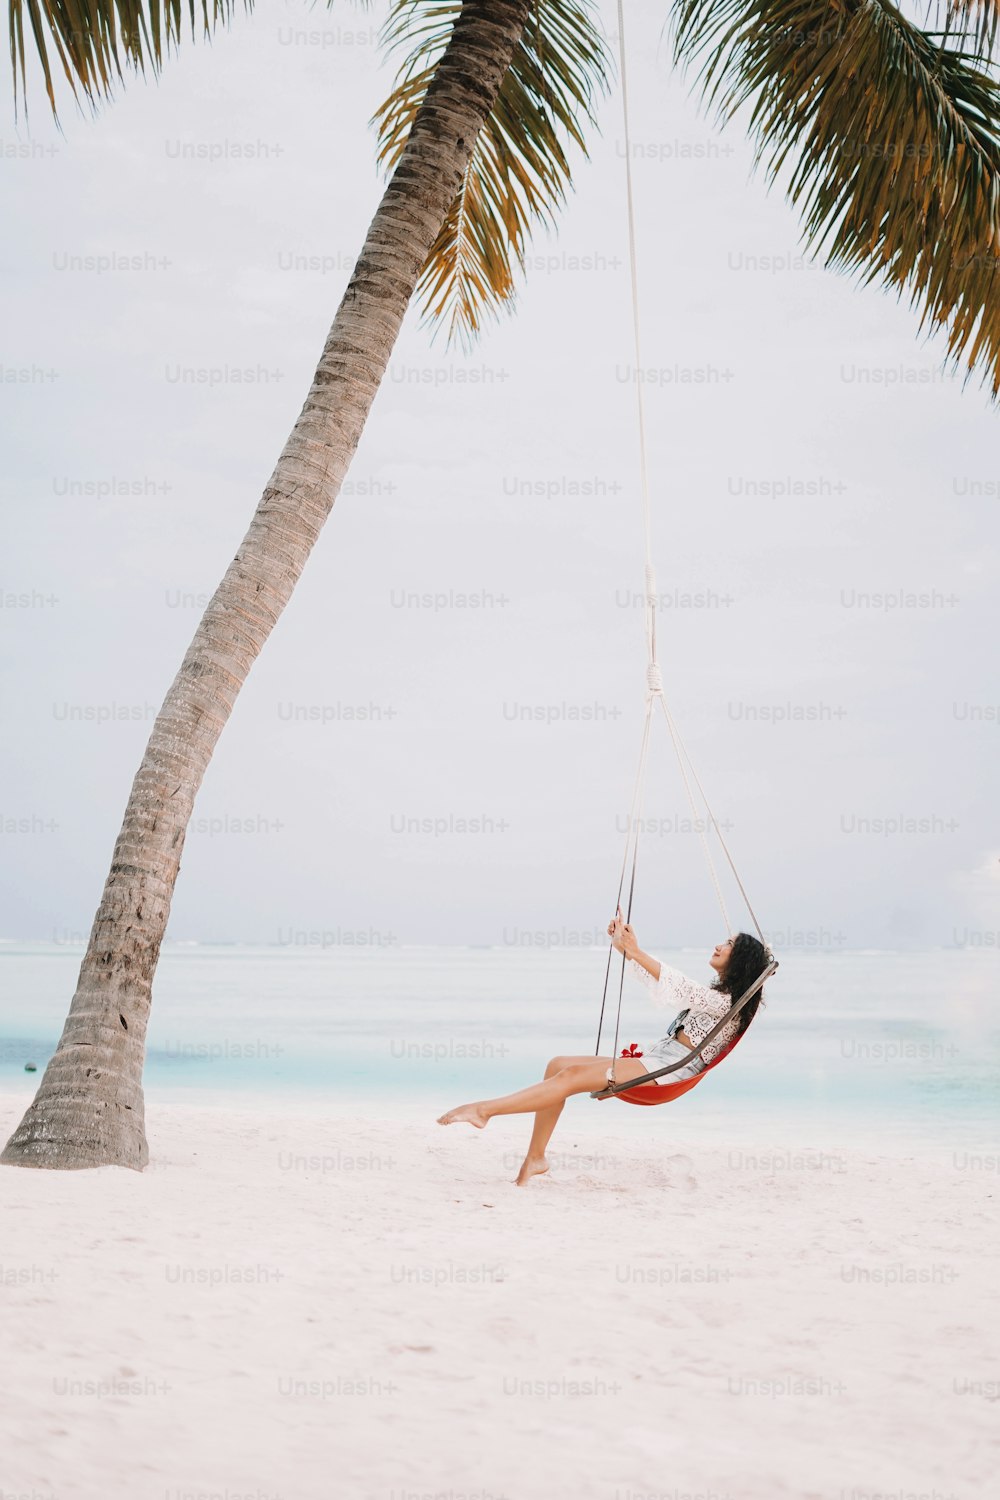 Fishing Rod In Sand Of Tropical Beach Stock Photo - Download Image